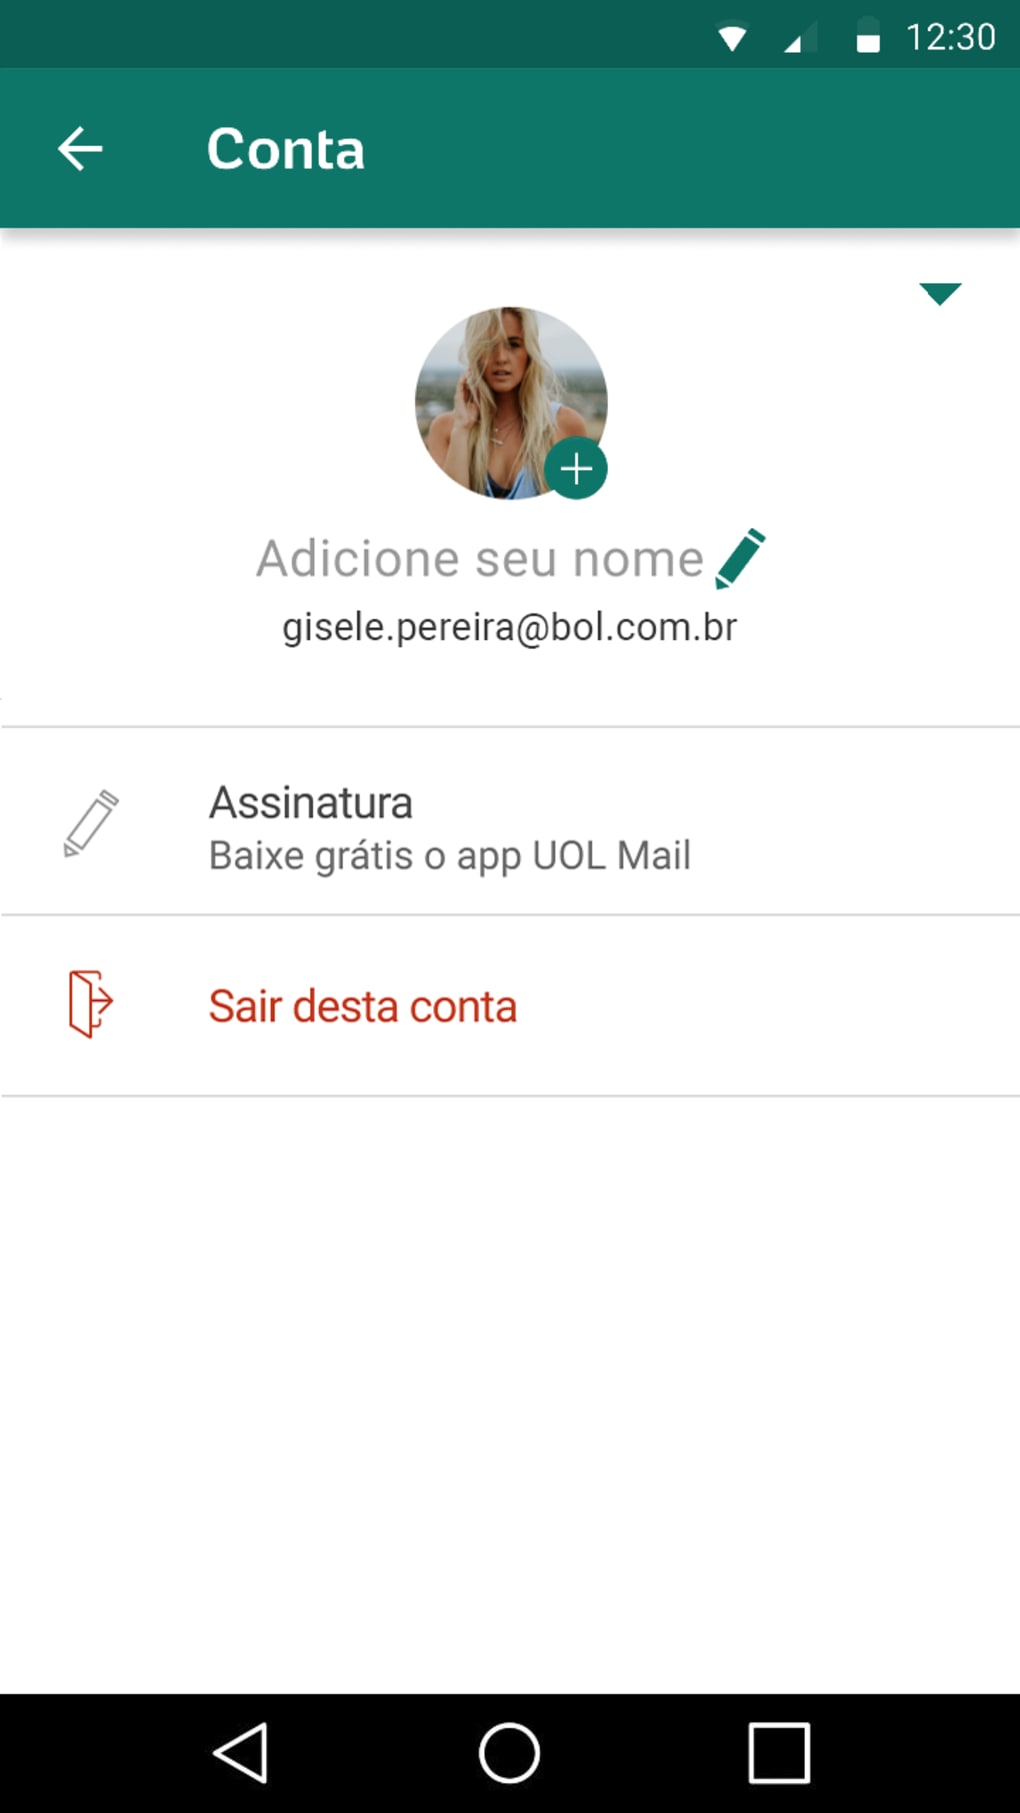 BOL Mail APK (Android App) - Free Download